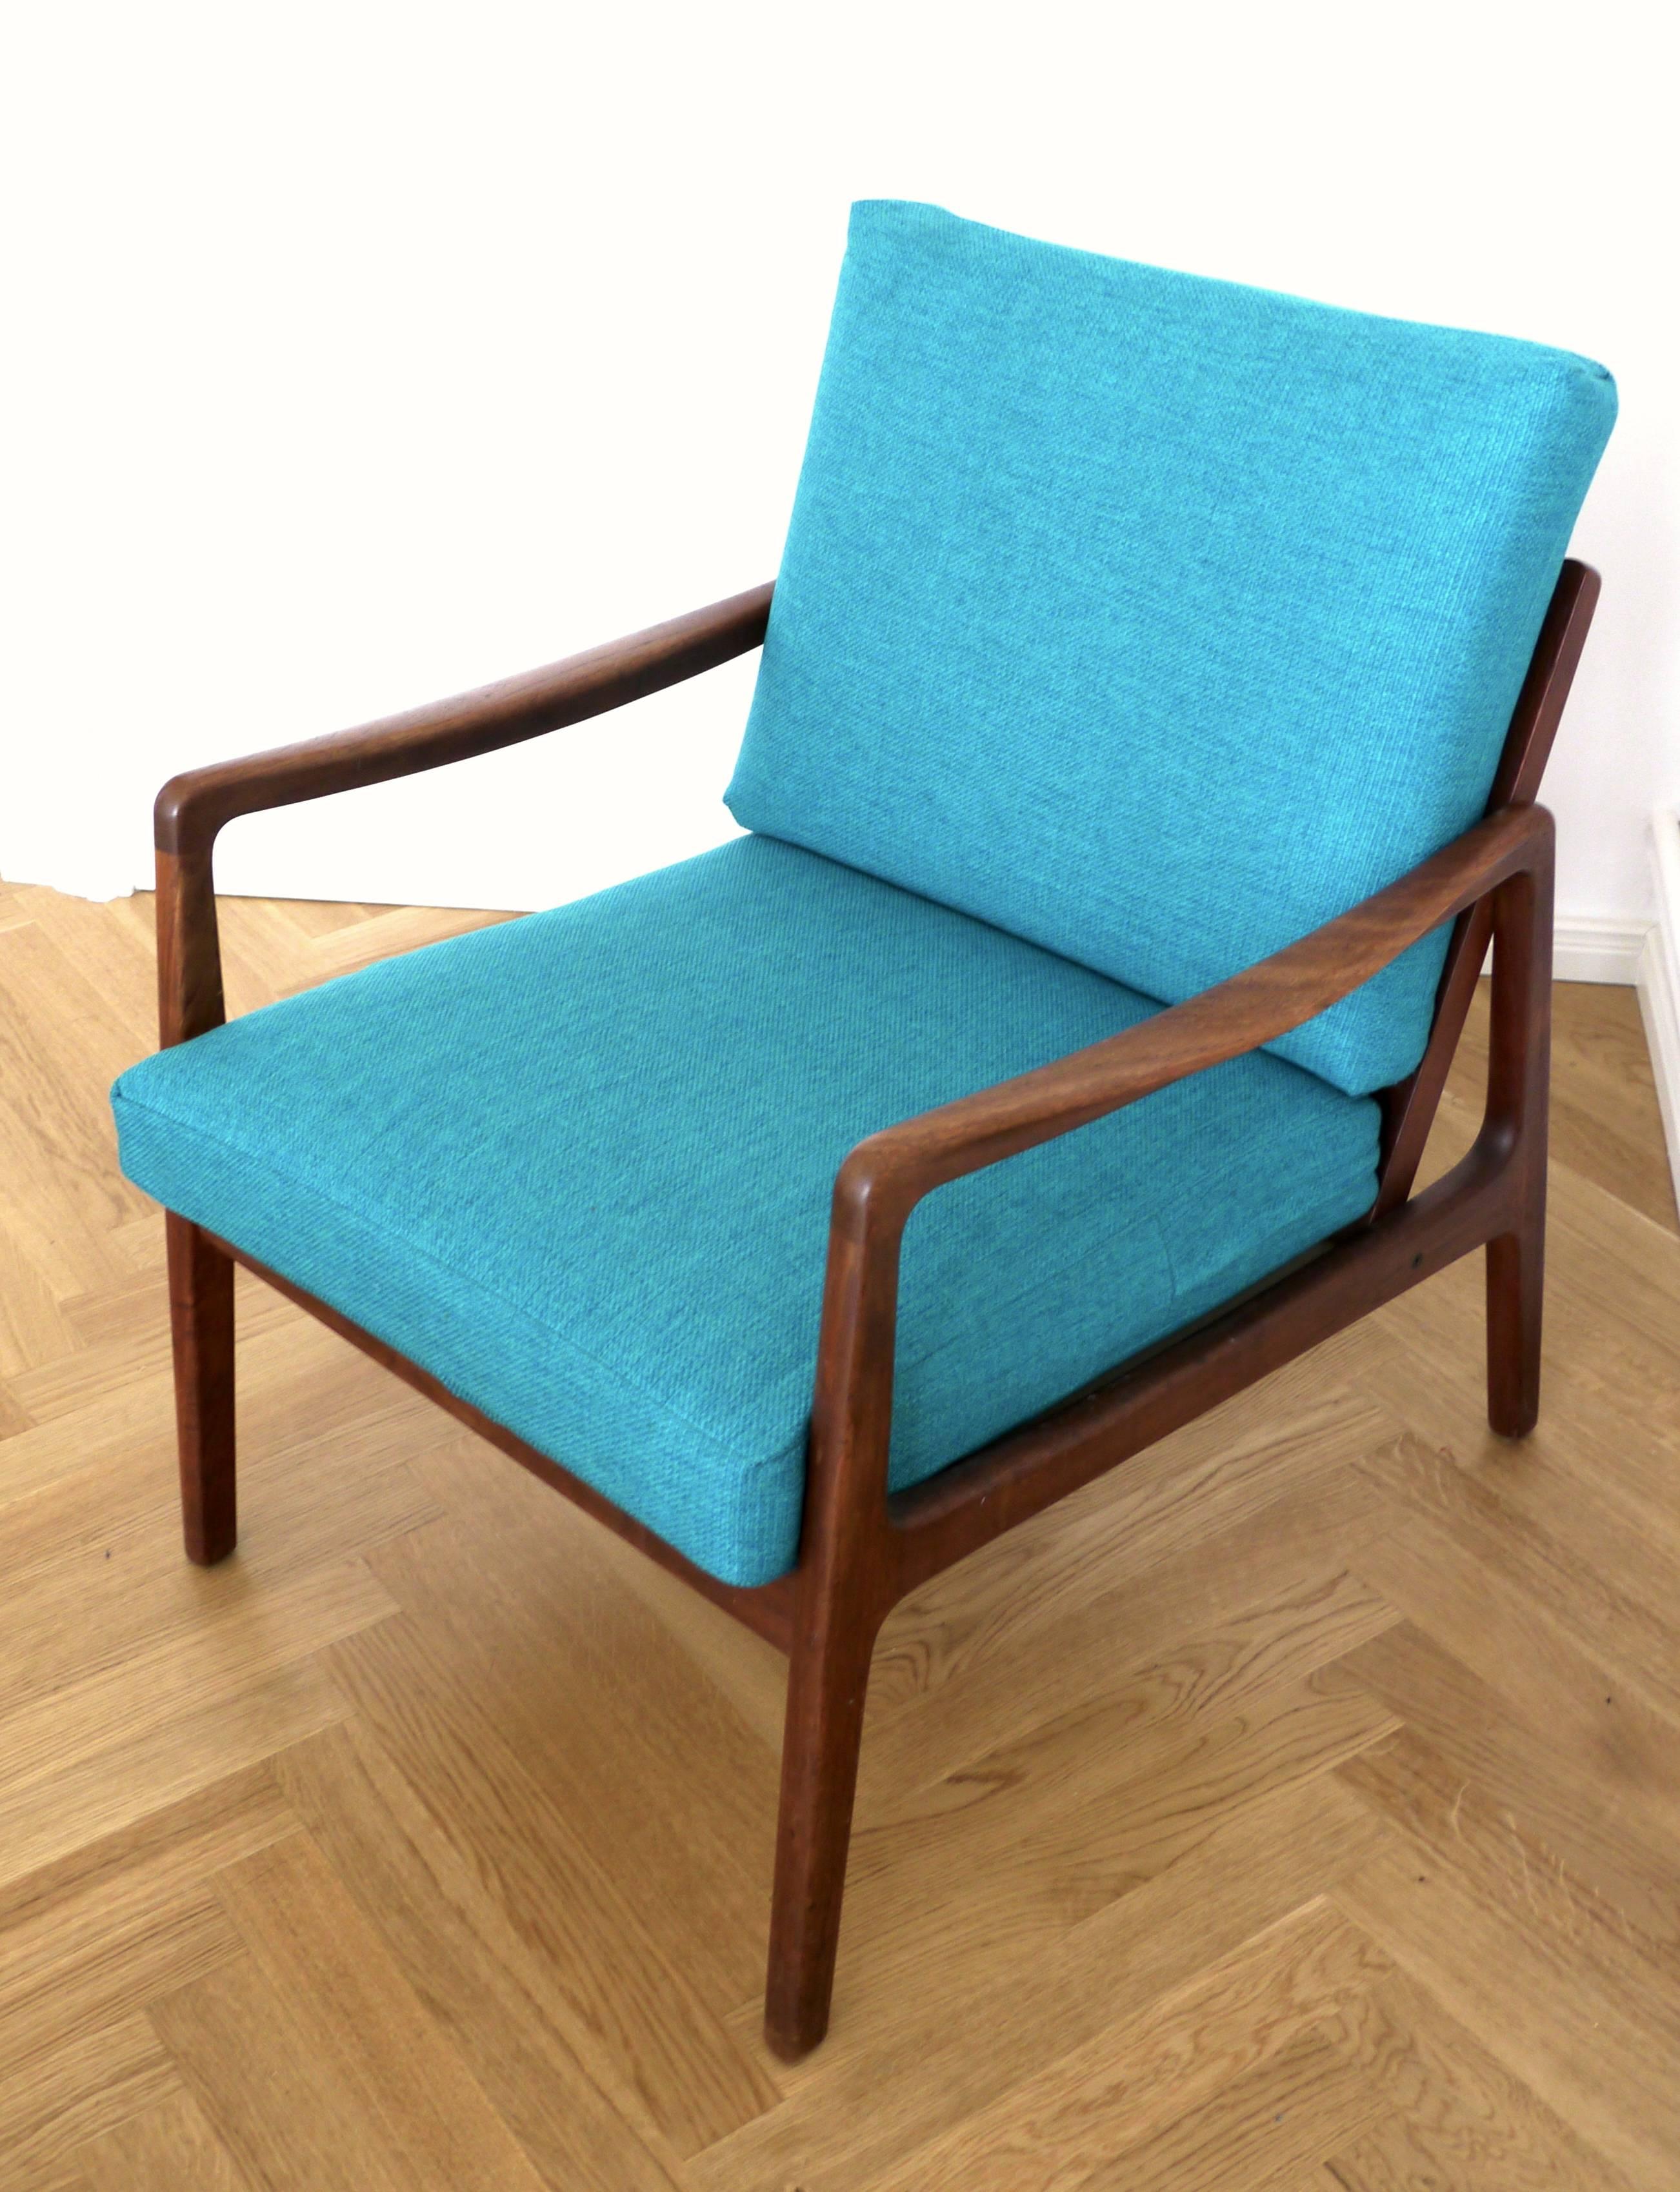 20th Century Mid-Century FD109 Teak Easy Lounge Chair by Ole Wanscher for France & Søn, 1960s For Sale